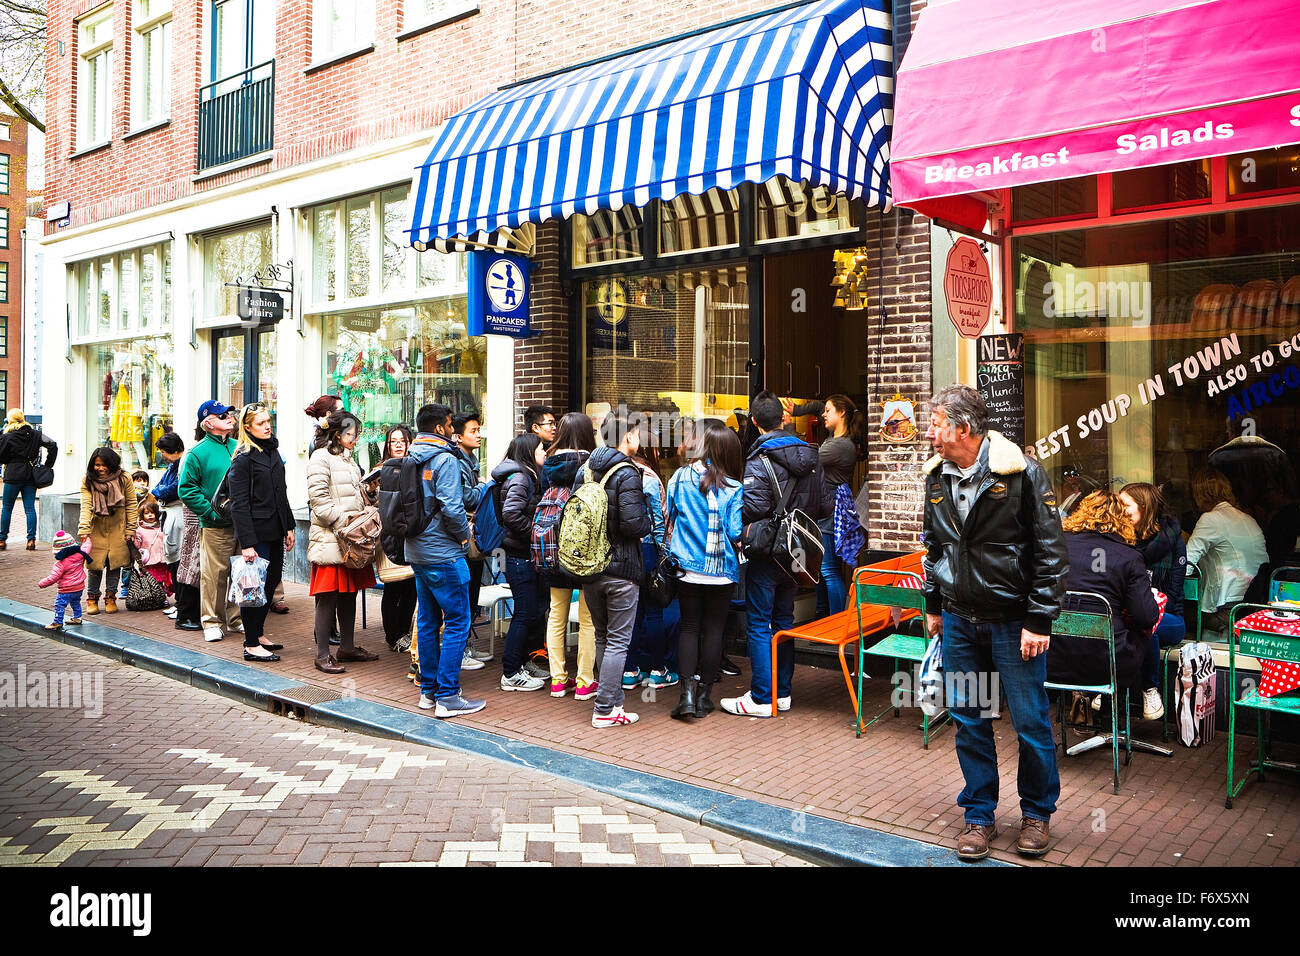 Queue of people outside of a pancake shop in Amsterdam Stock Photo